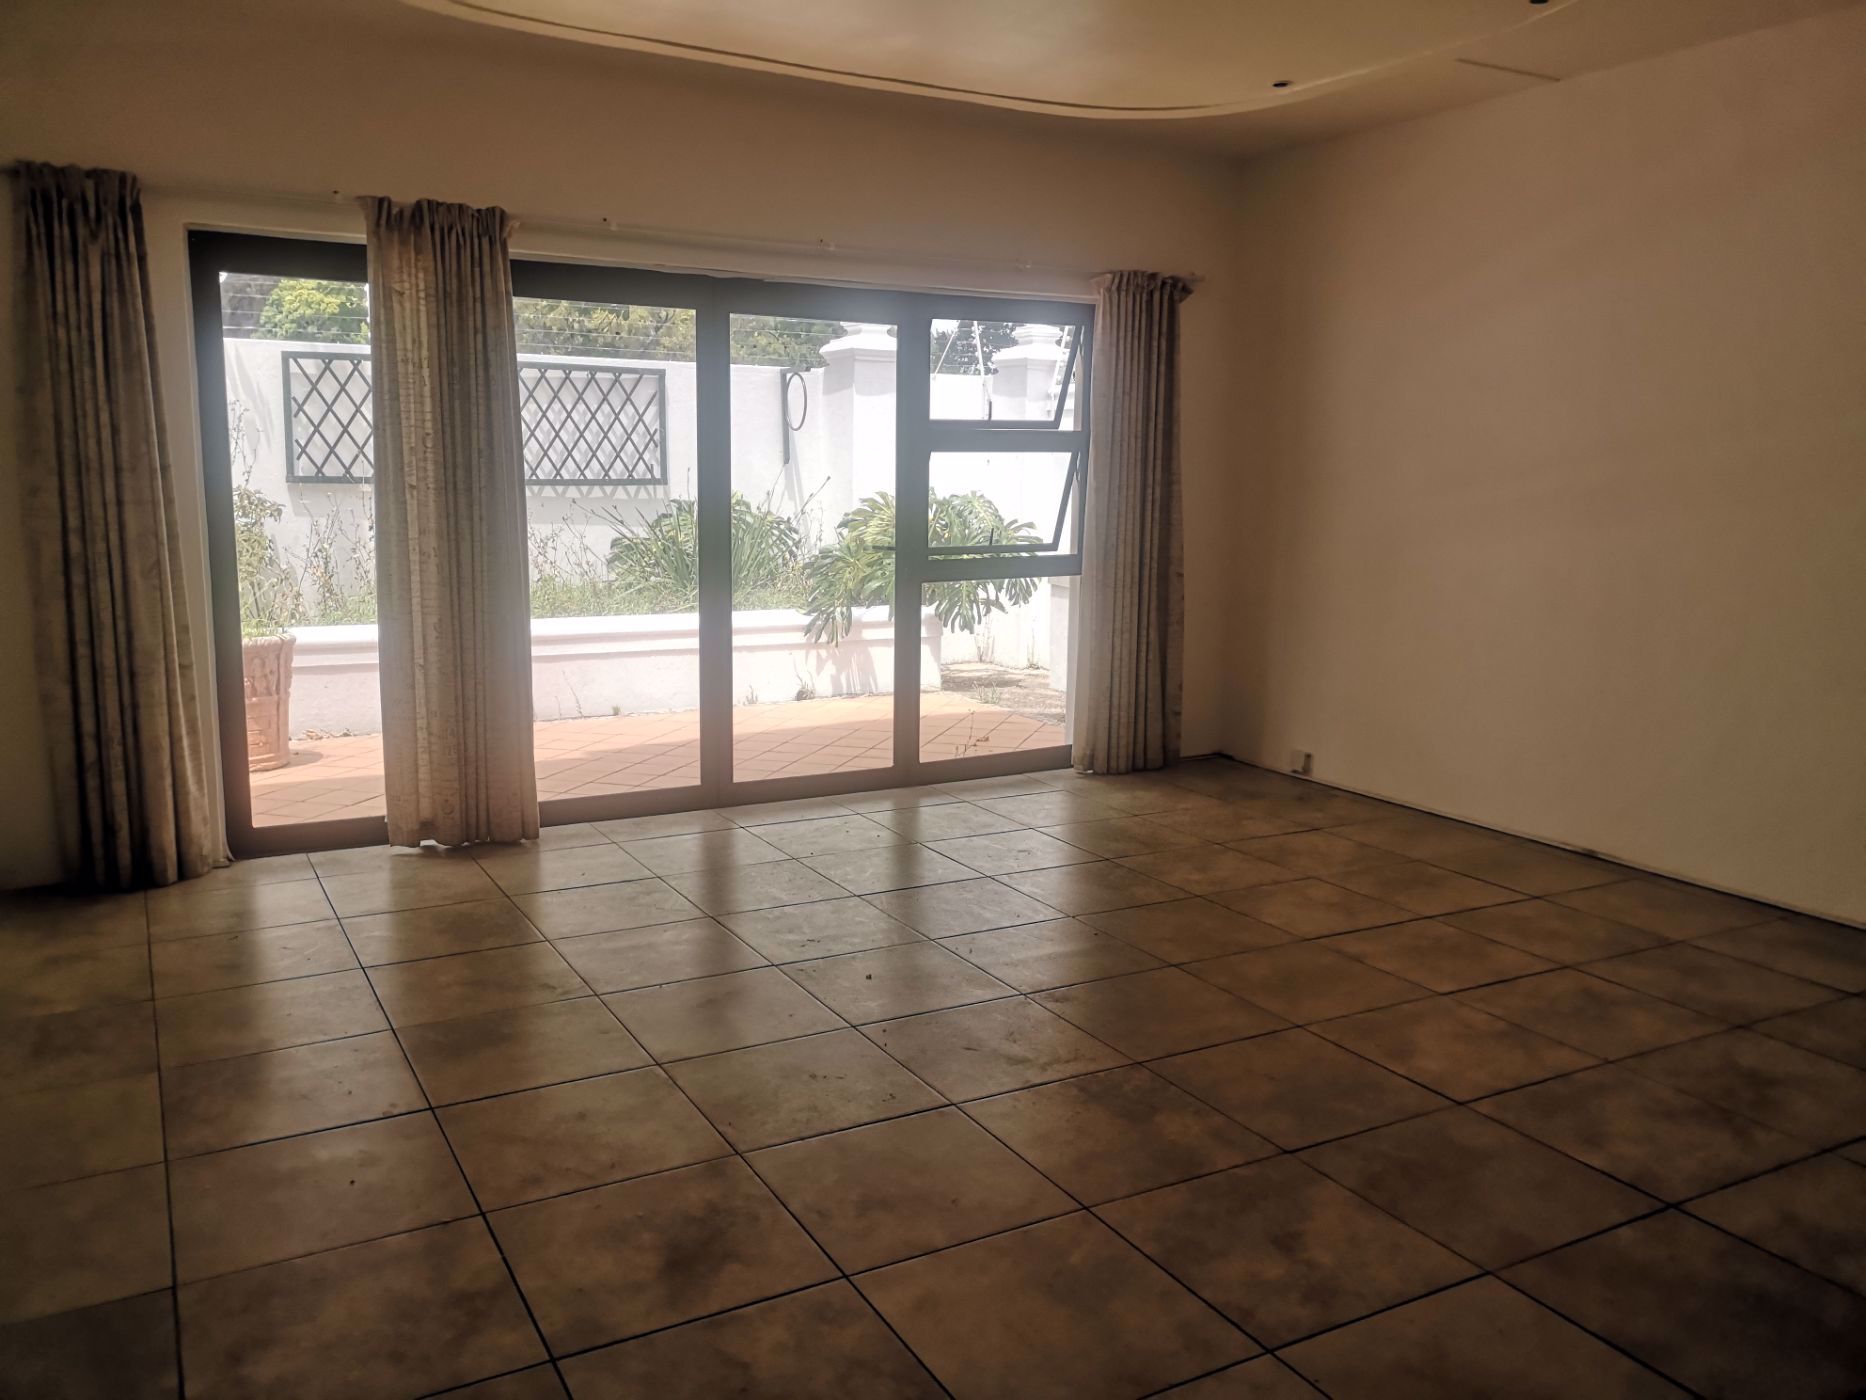 5 bedroom townhouse to rent in Kenilworth (Cape Town)